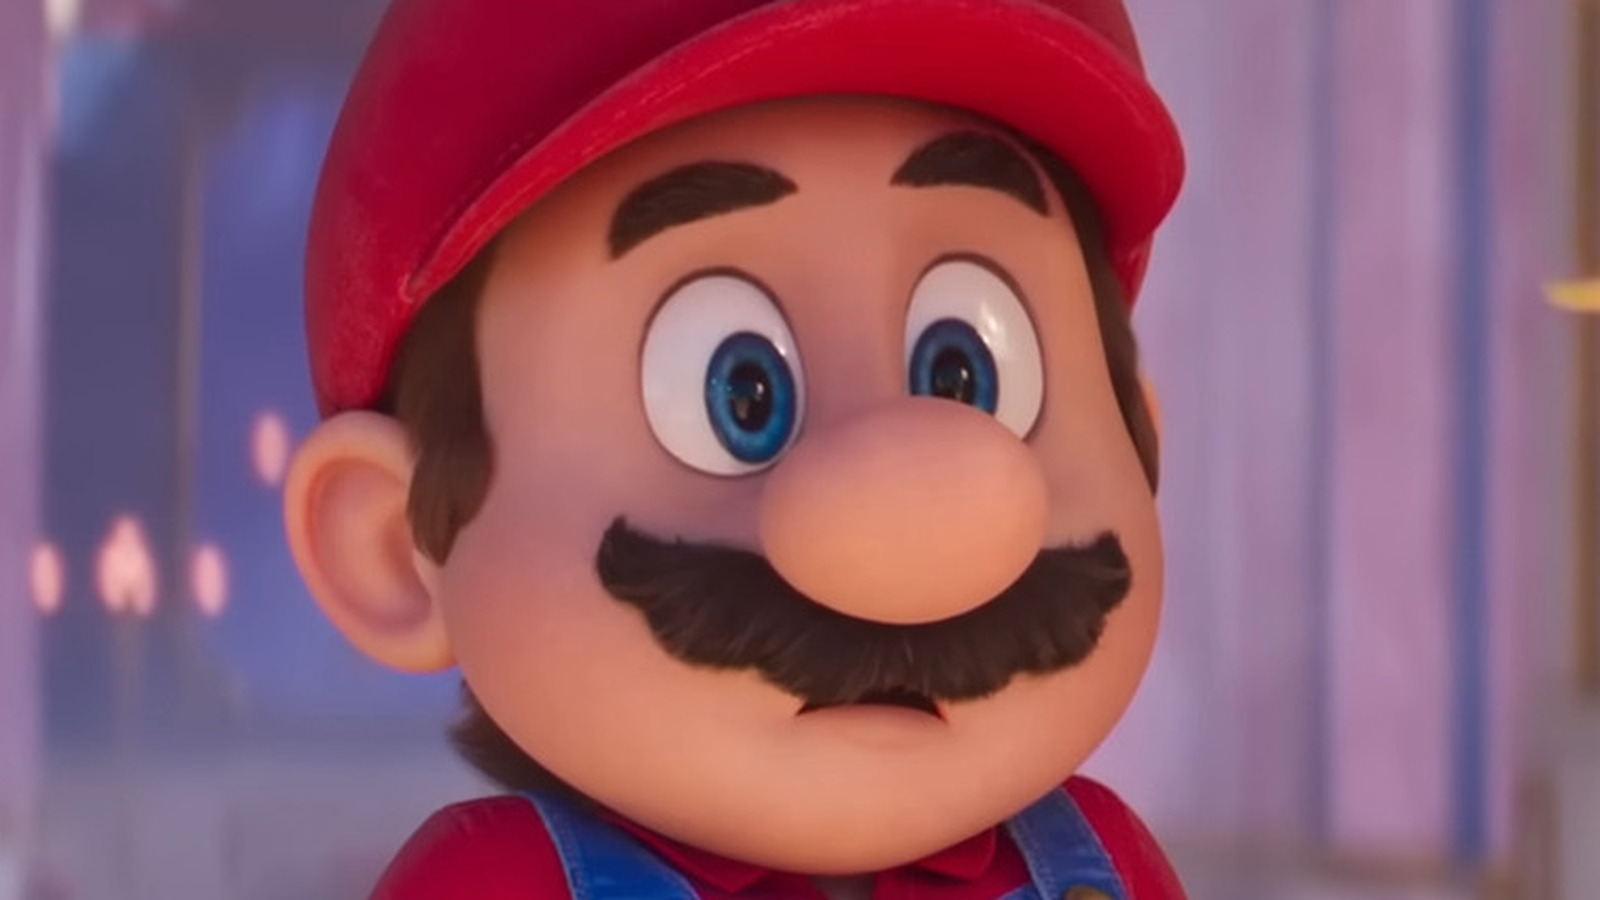 5 actors who could have voiced Mario over Chris Pratt